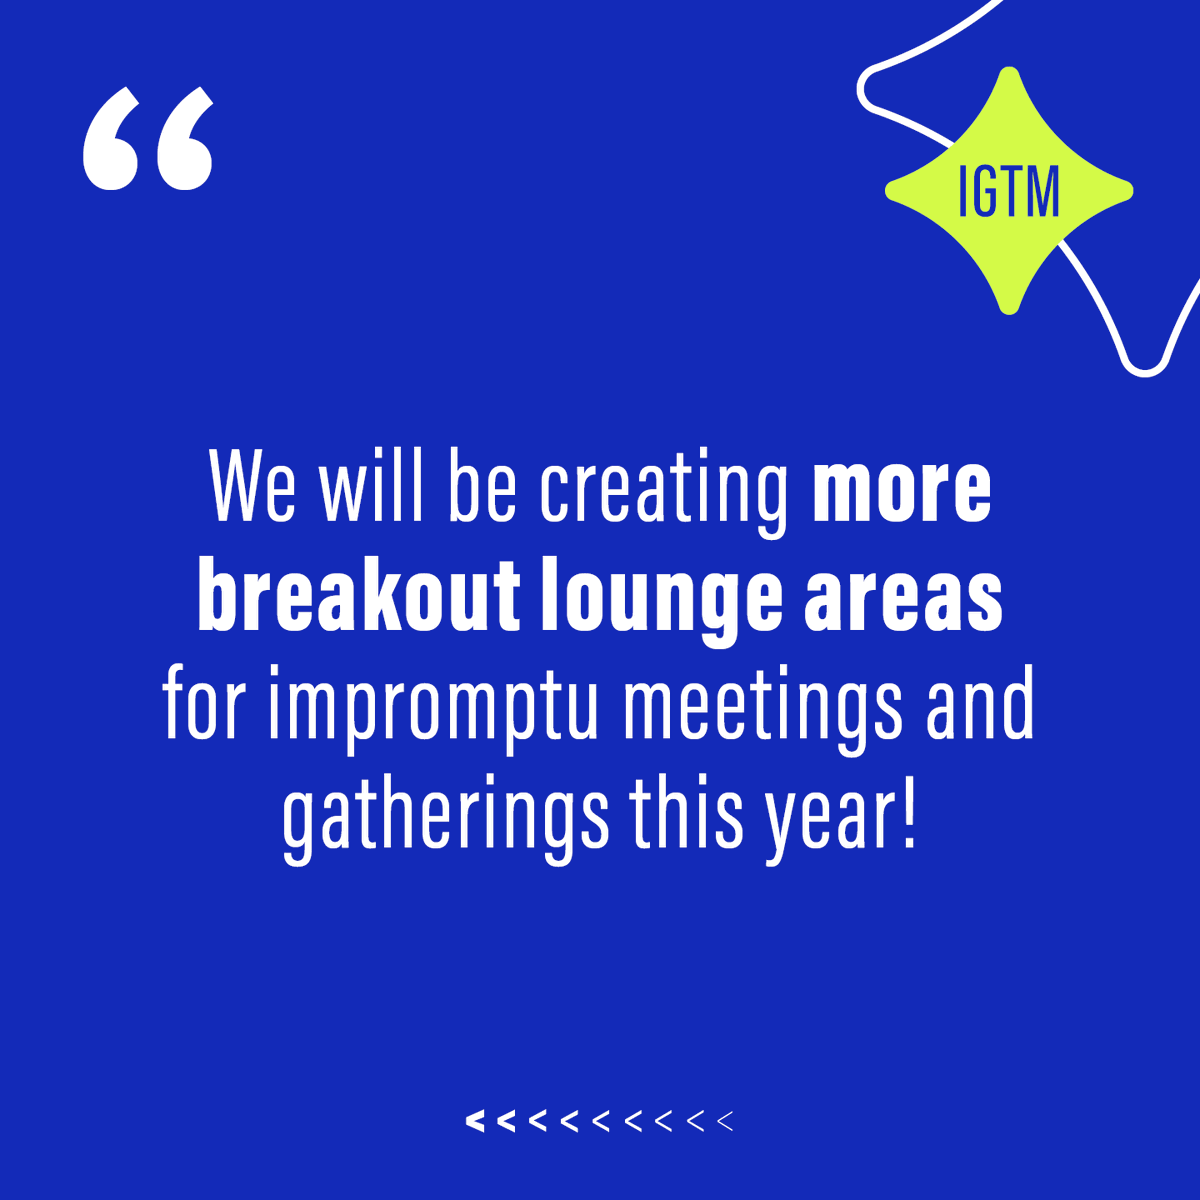 You loved being able to have “off-book” meetings in the media centre, even though it was naturally bustling with media activities. That’s why we’ll be creating more breakout lounge areas for impromptu meetings and gatherings! 👋 💻 igtmarket.com #GolfTogether